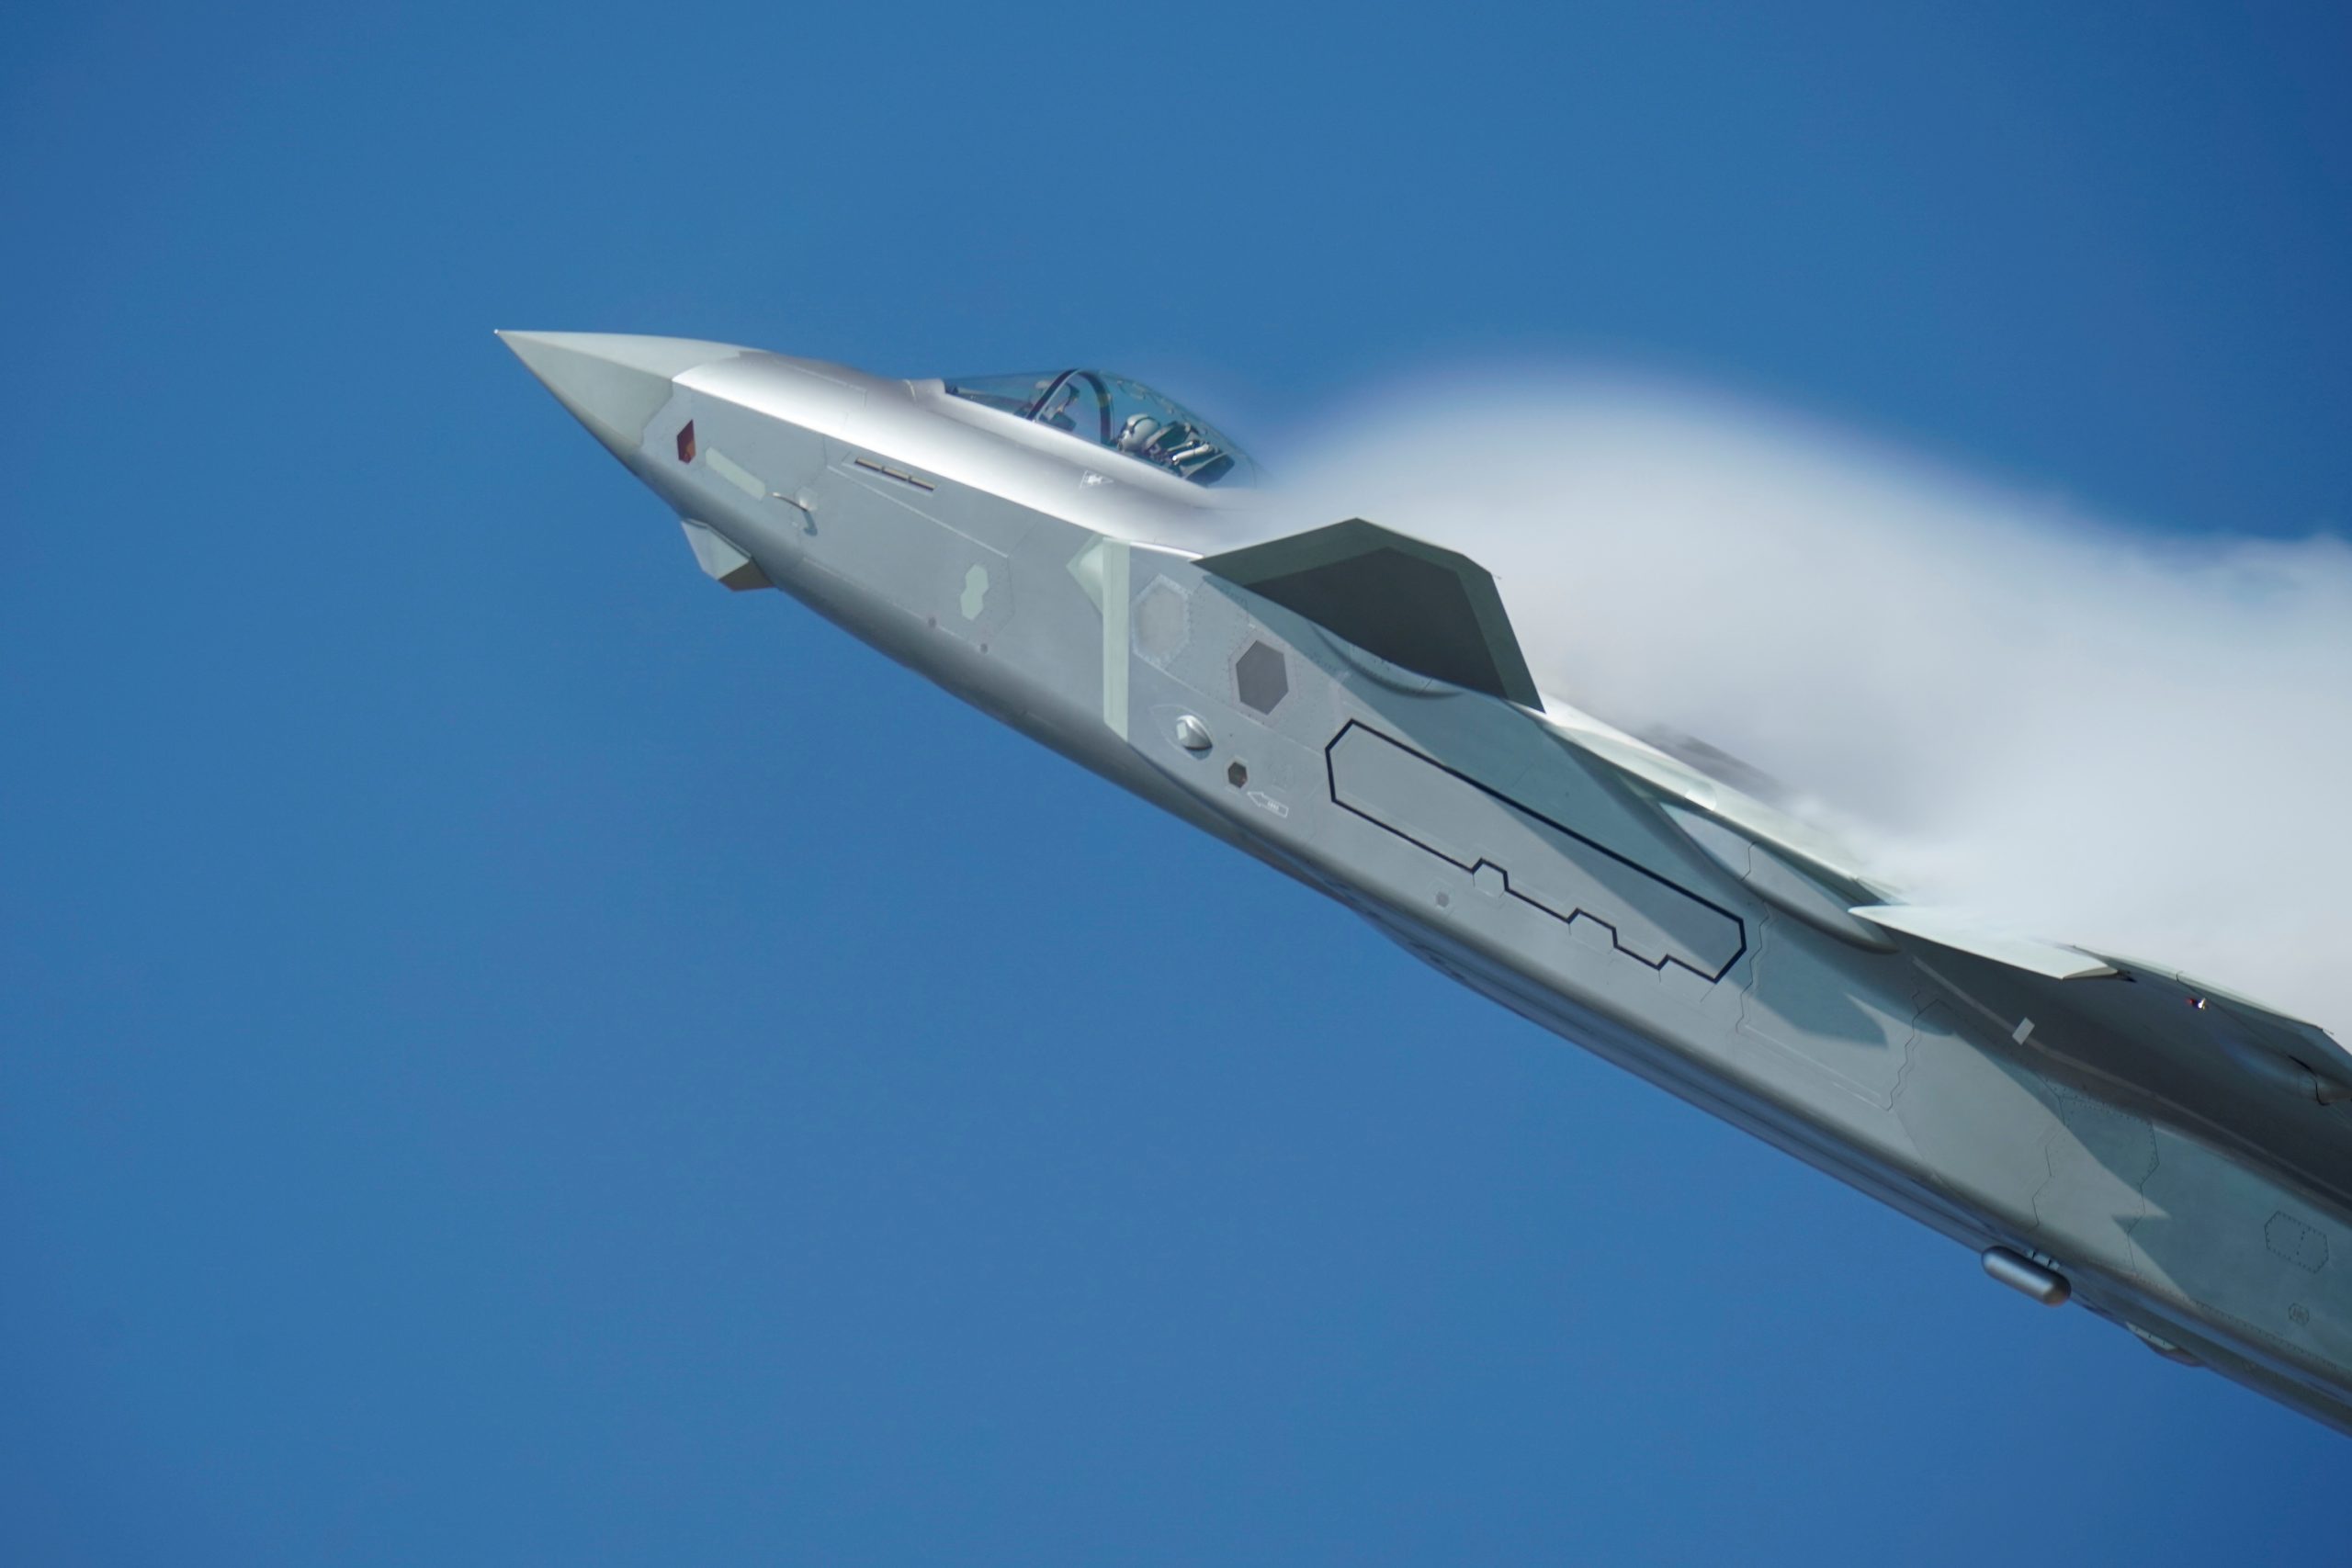 Can China Call its J-20 stealth fighter 5th generation?